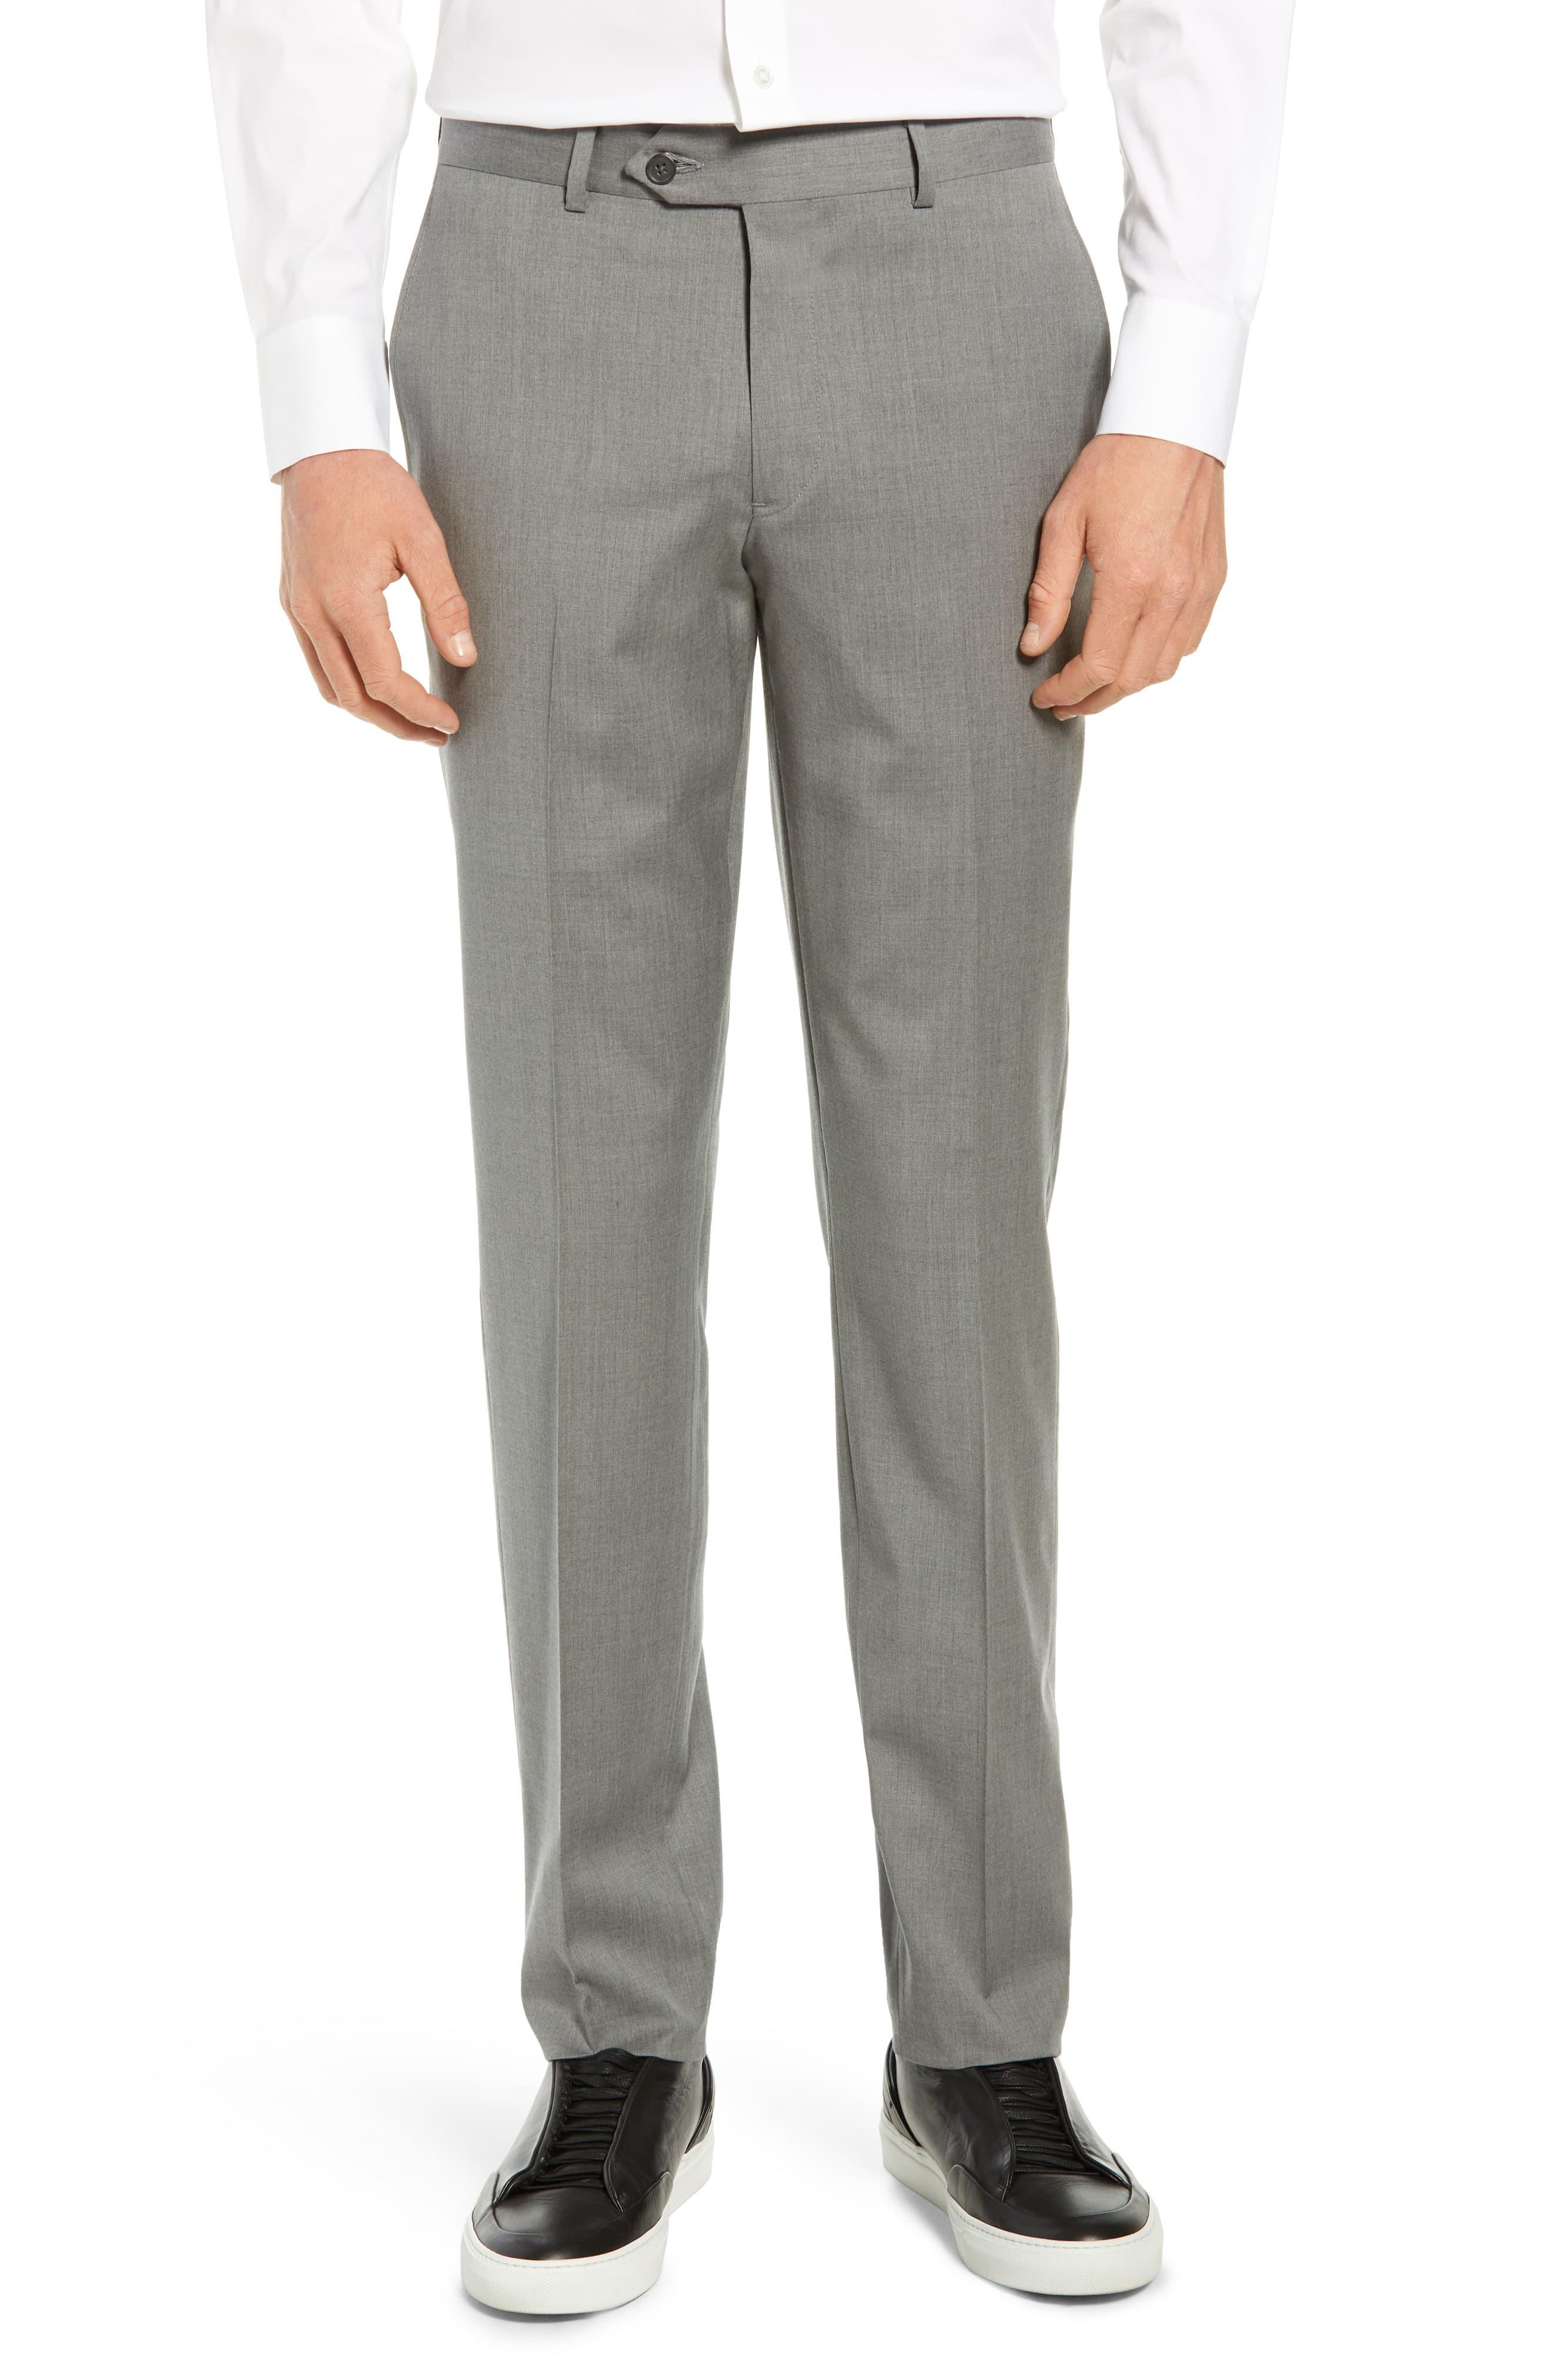 Nordstrom Slim Fit Stretch Wool Trousers in Gray for Men - Lyst